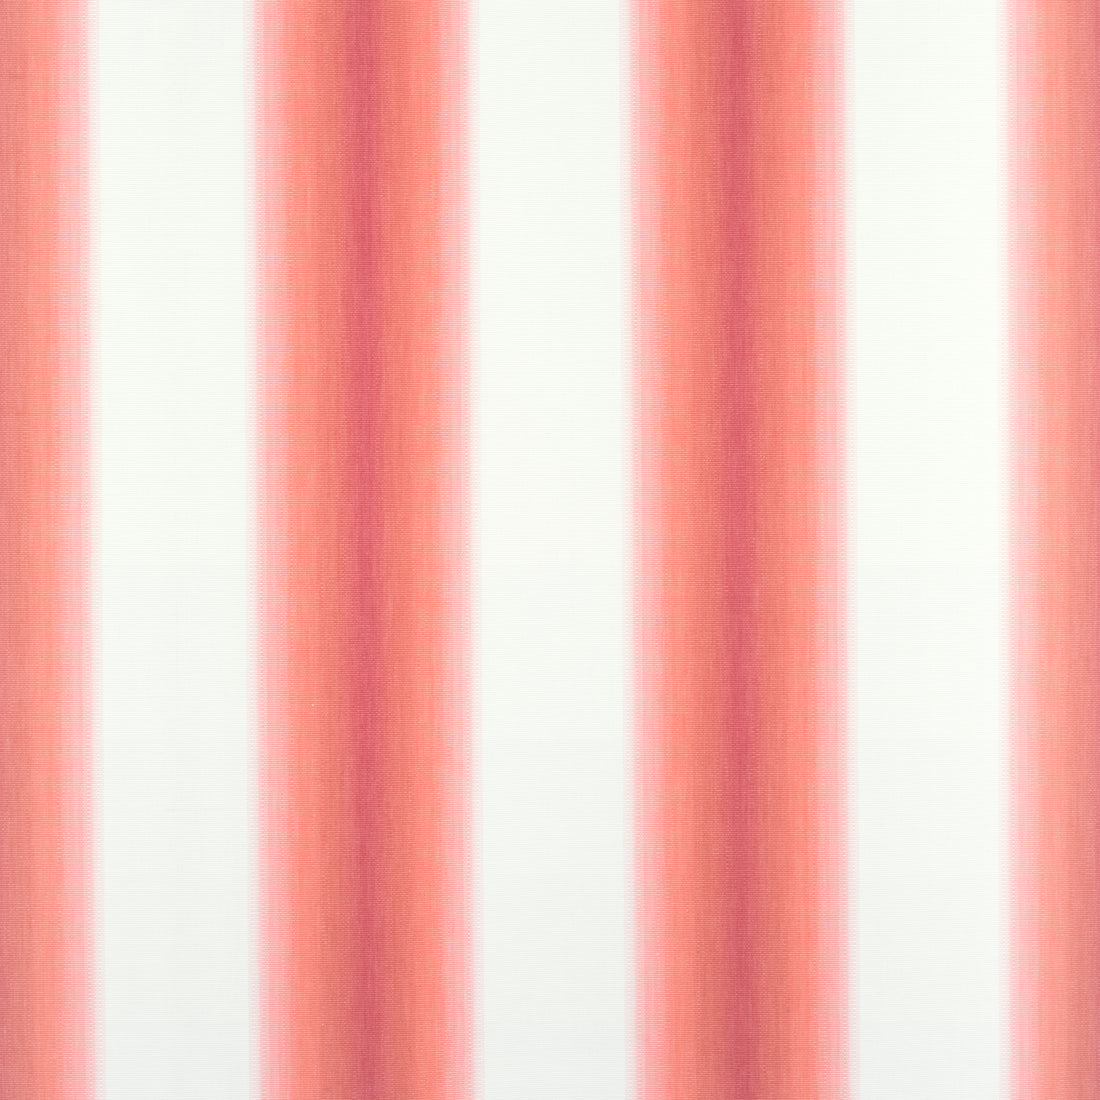 Stockton Stripe fabric in coral color - pattern number W775503 - by Thibaut in the Dynasty collection